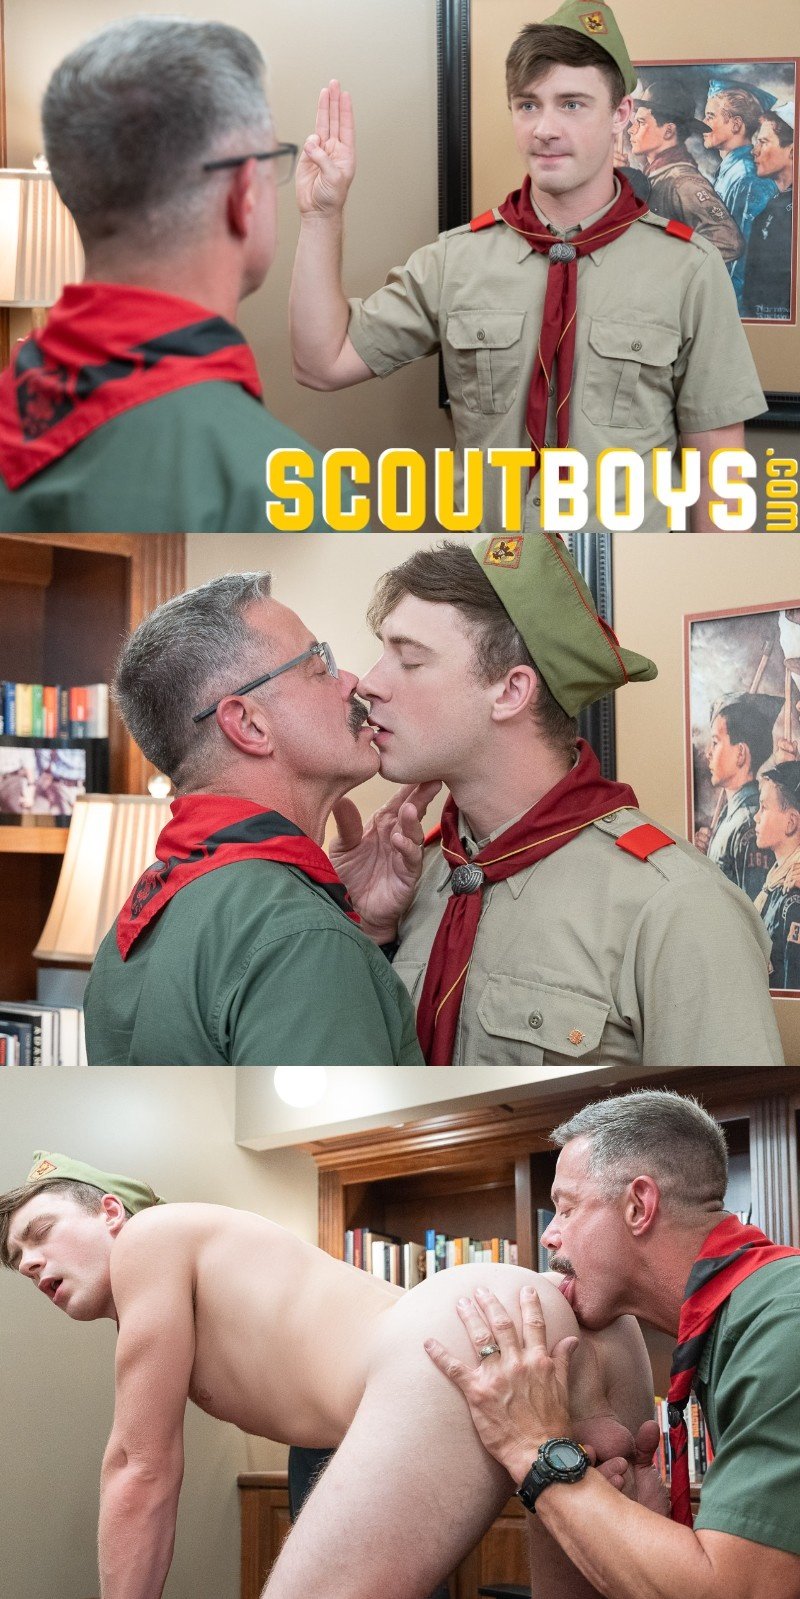 Scout Leader Rams His 9 Inches Into Lads Tight Hole on Cock4Cock